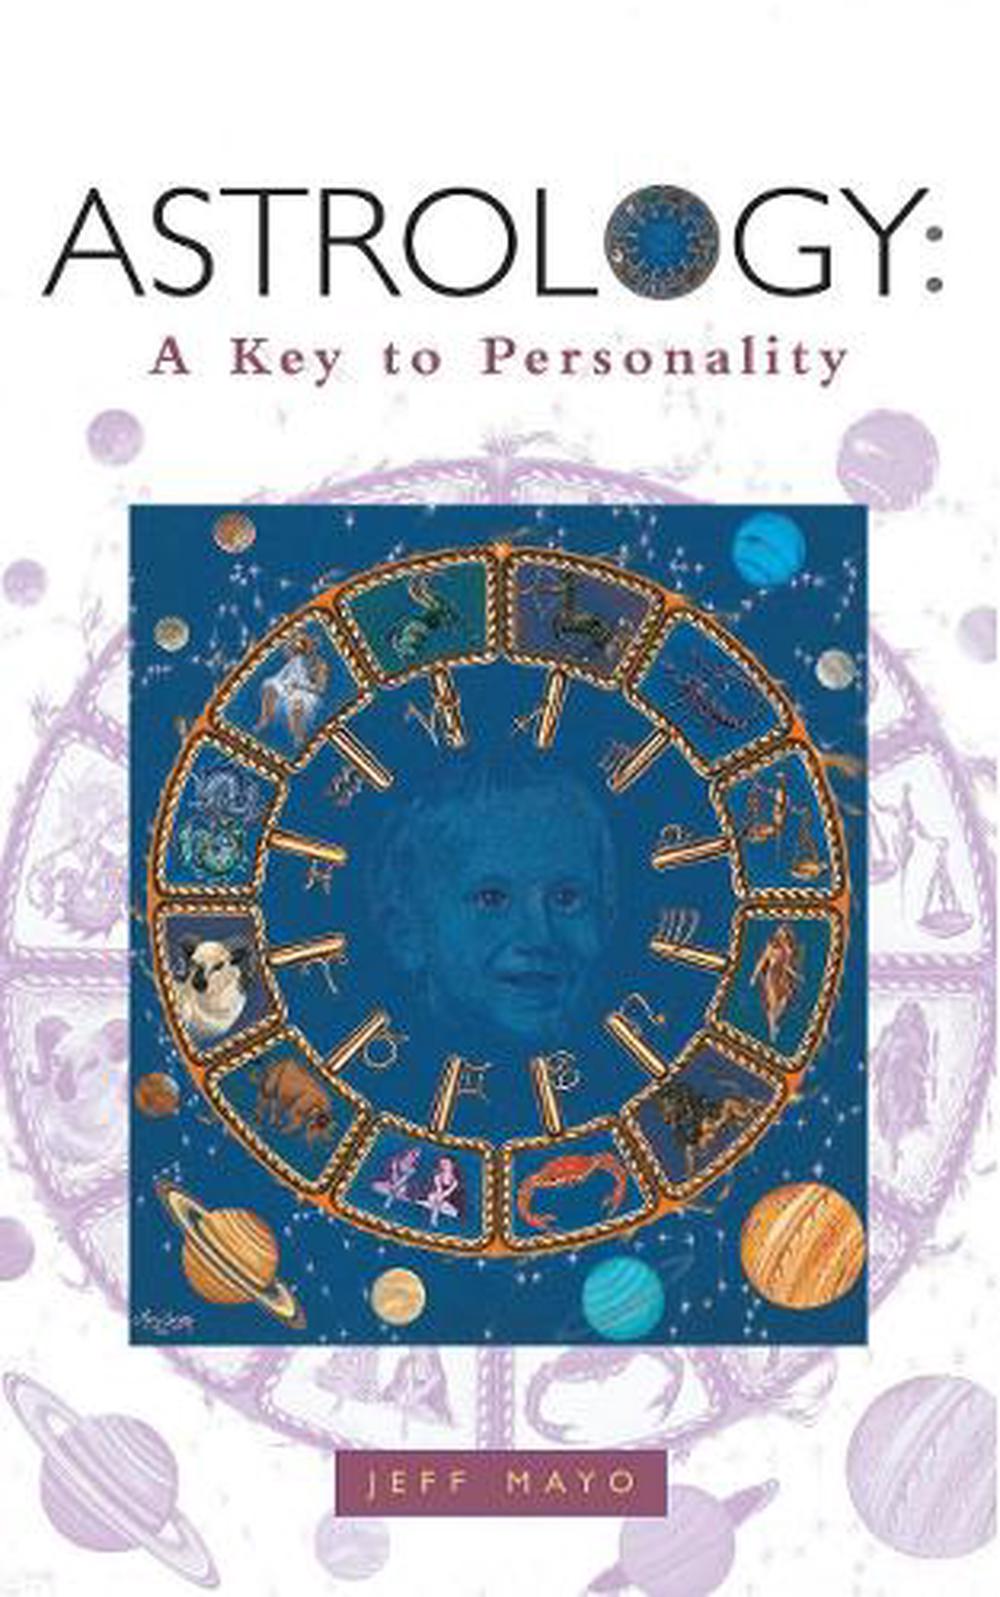 Astrology by Jeff Mayo, Paperback, 9781846042218 | Buy online at The Nile